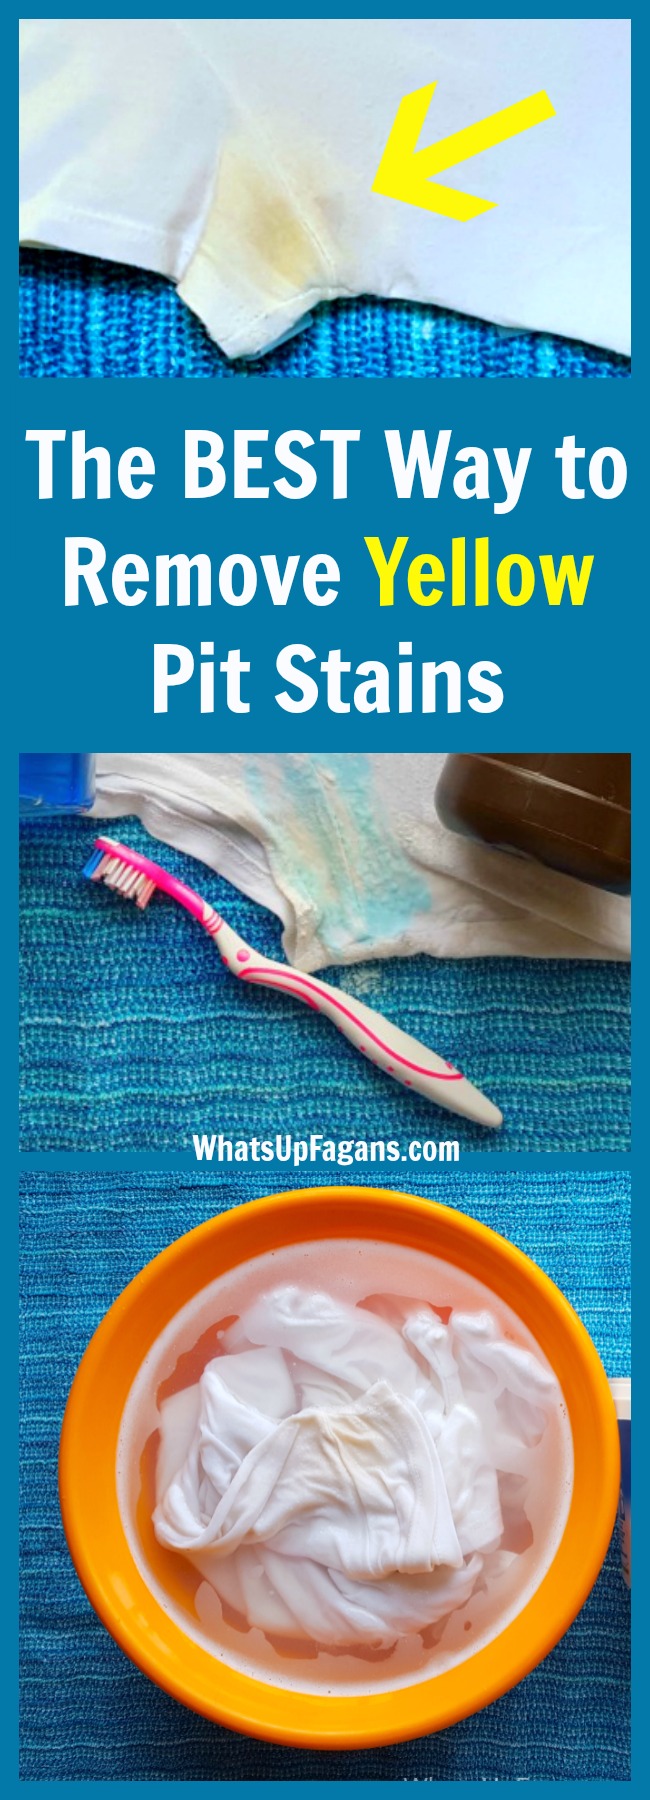 Armpit Stains | Remove Pit Stain | Sweat Stains | Yellow Sweat Stains | White T-Shirts | Laundry Tip | Laundry Stain Removal | Cleaning Tip Tutorial Hack